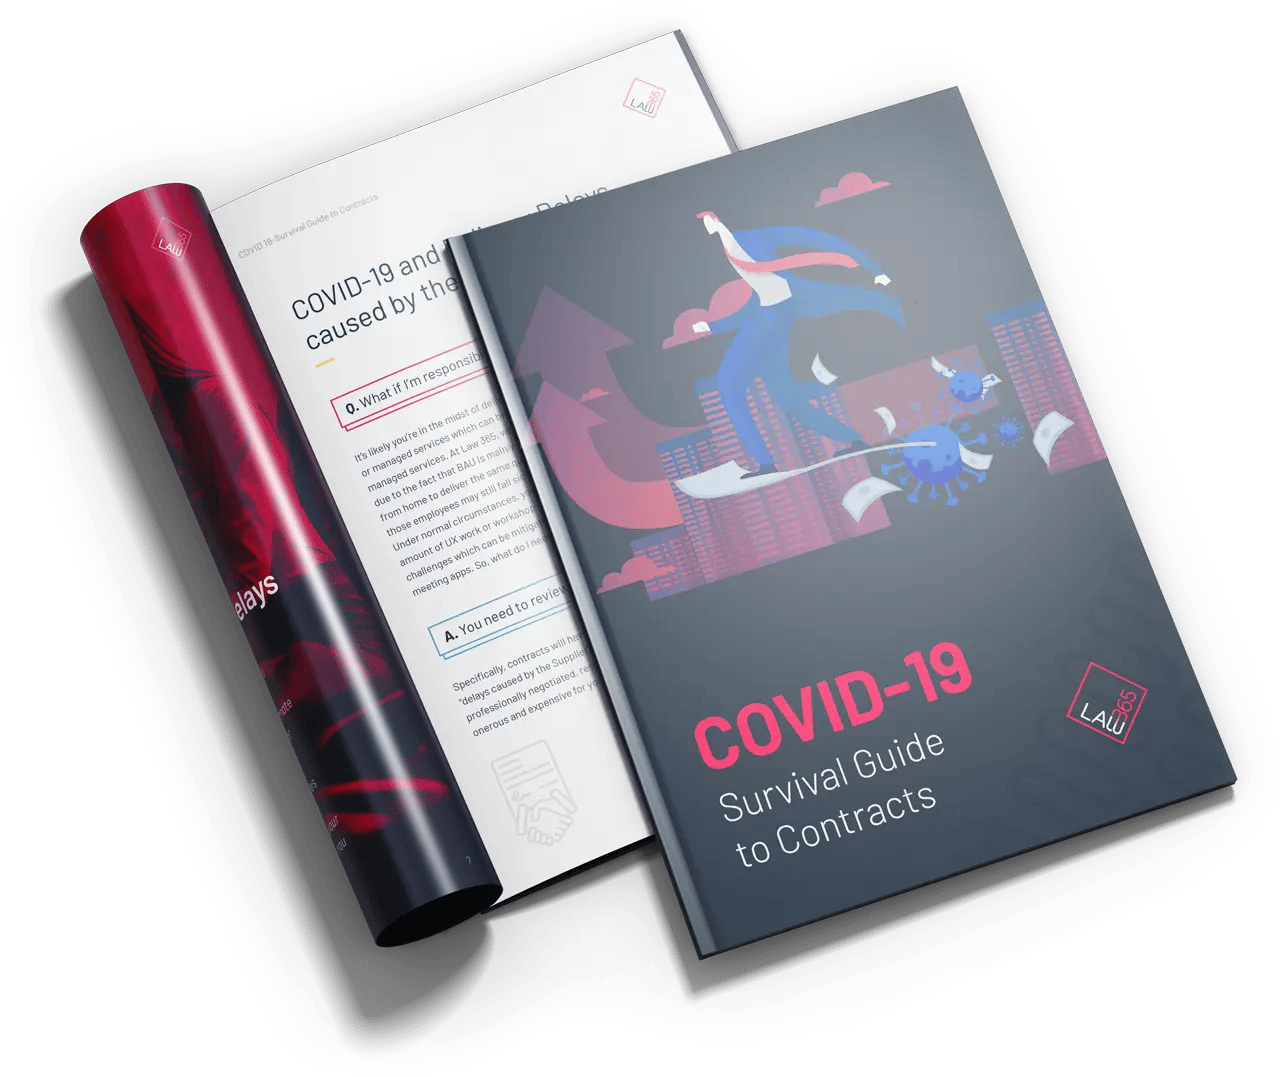 COVID-19 Survival Guide to Contracts